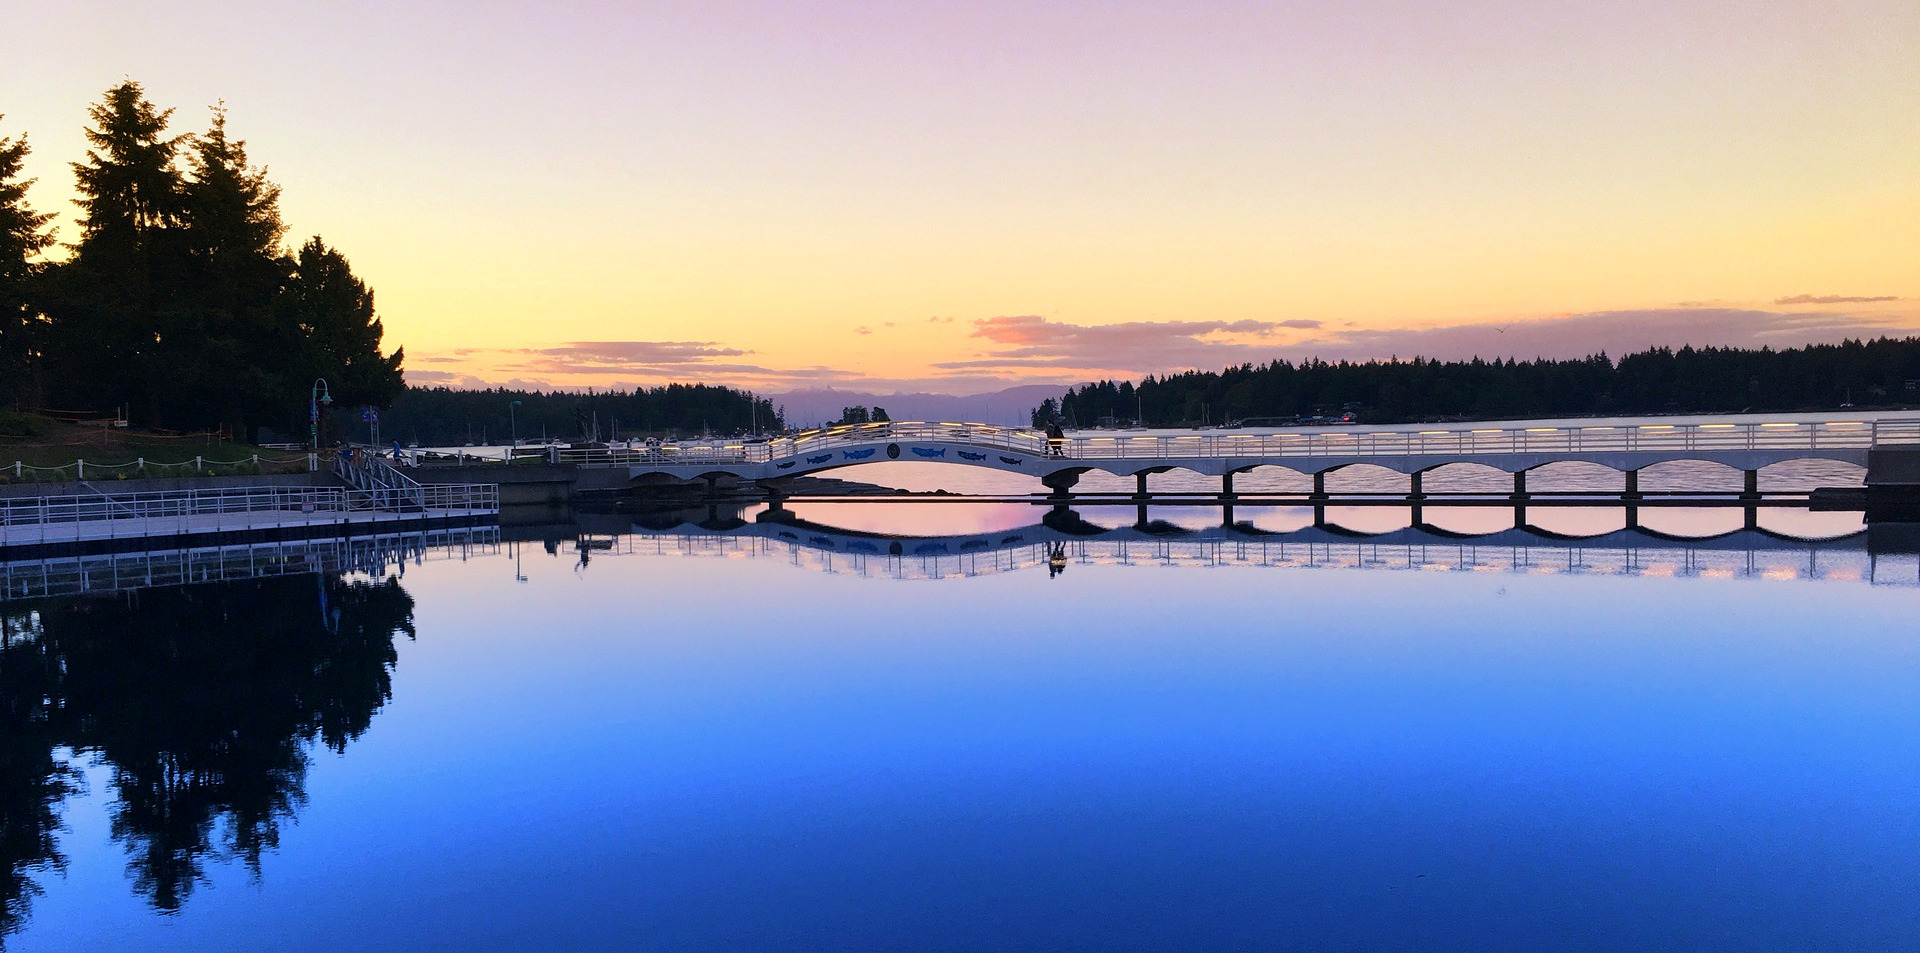 A photo of the Nanaimo Harbourfront, featuring a bridge and trees being reflected in water.